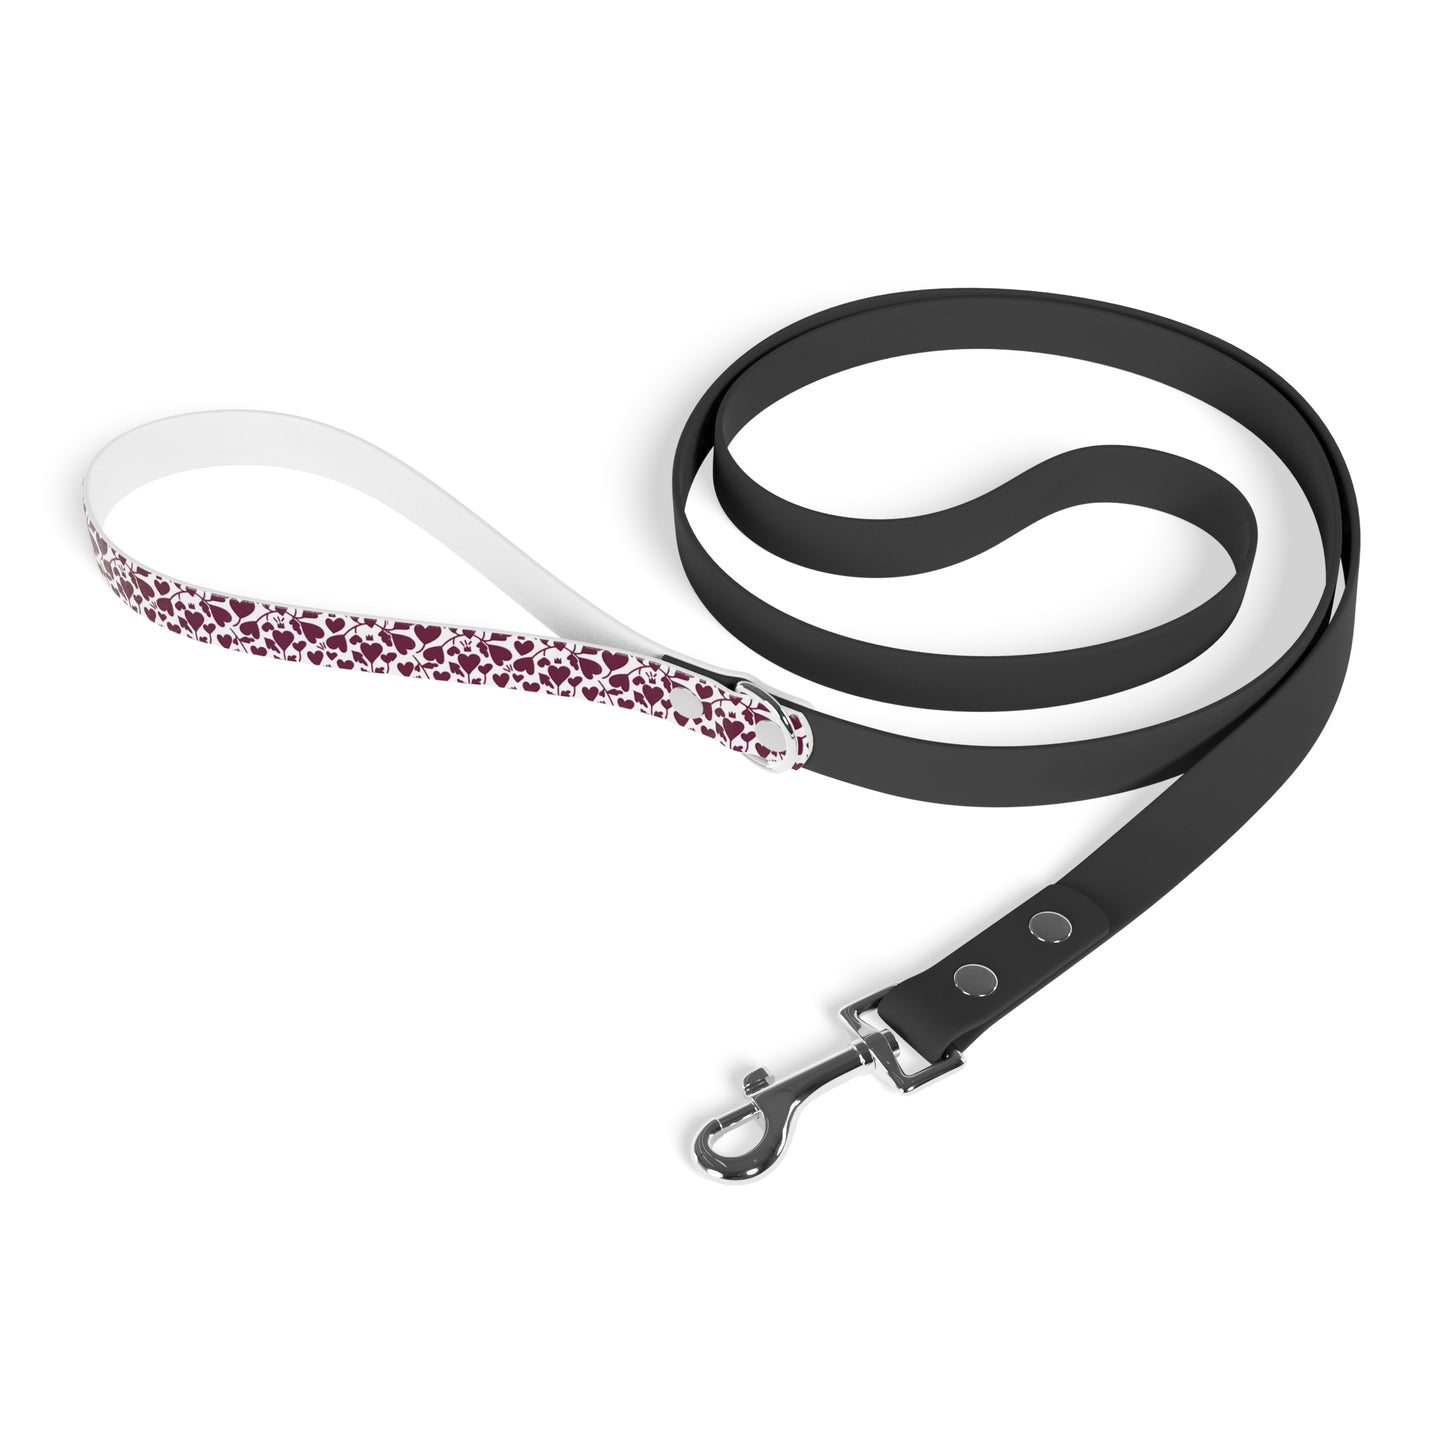 Niccie's Heart Pattern Pet Leash for Stylish Walks - High-Quality and Durable Design